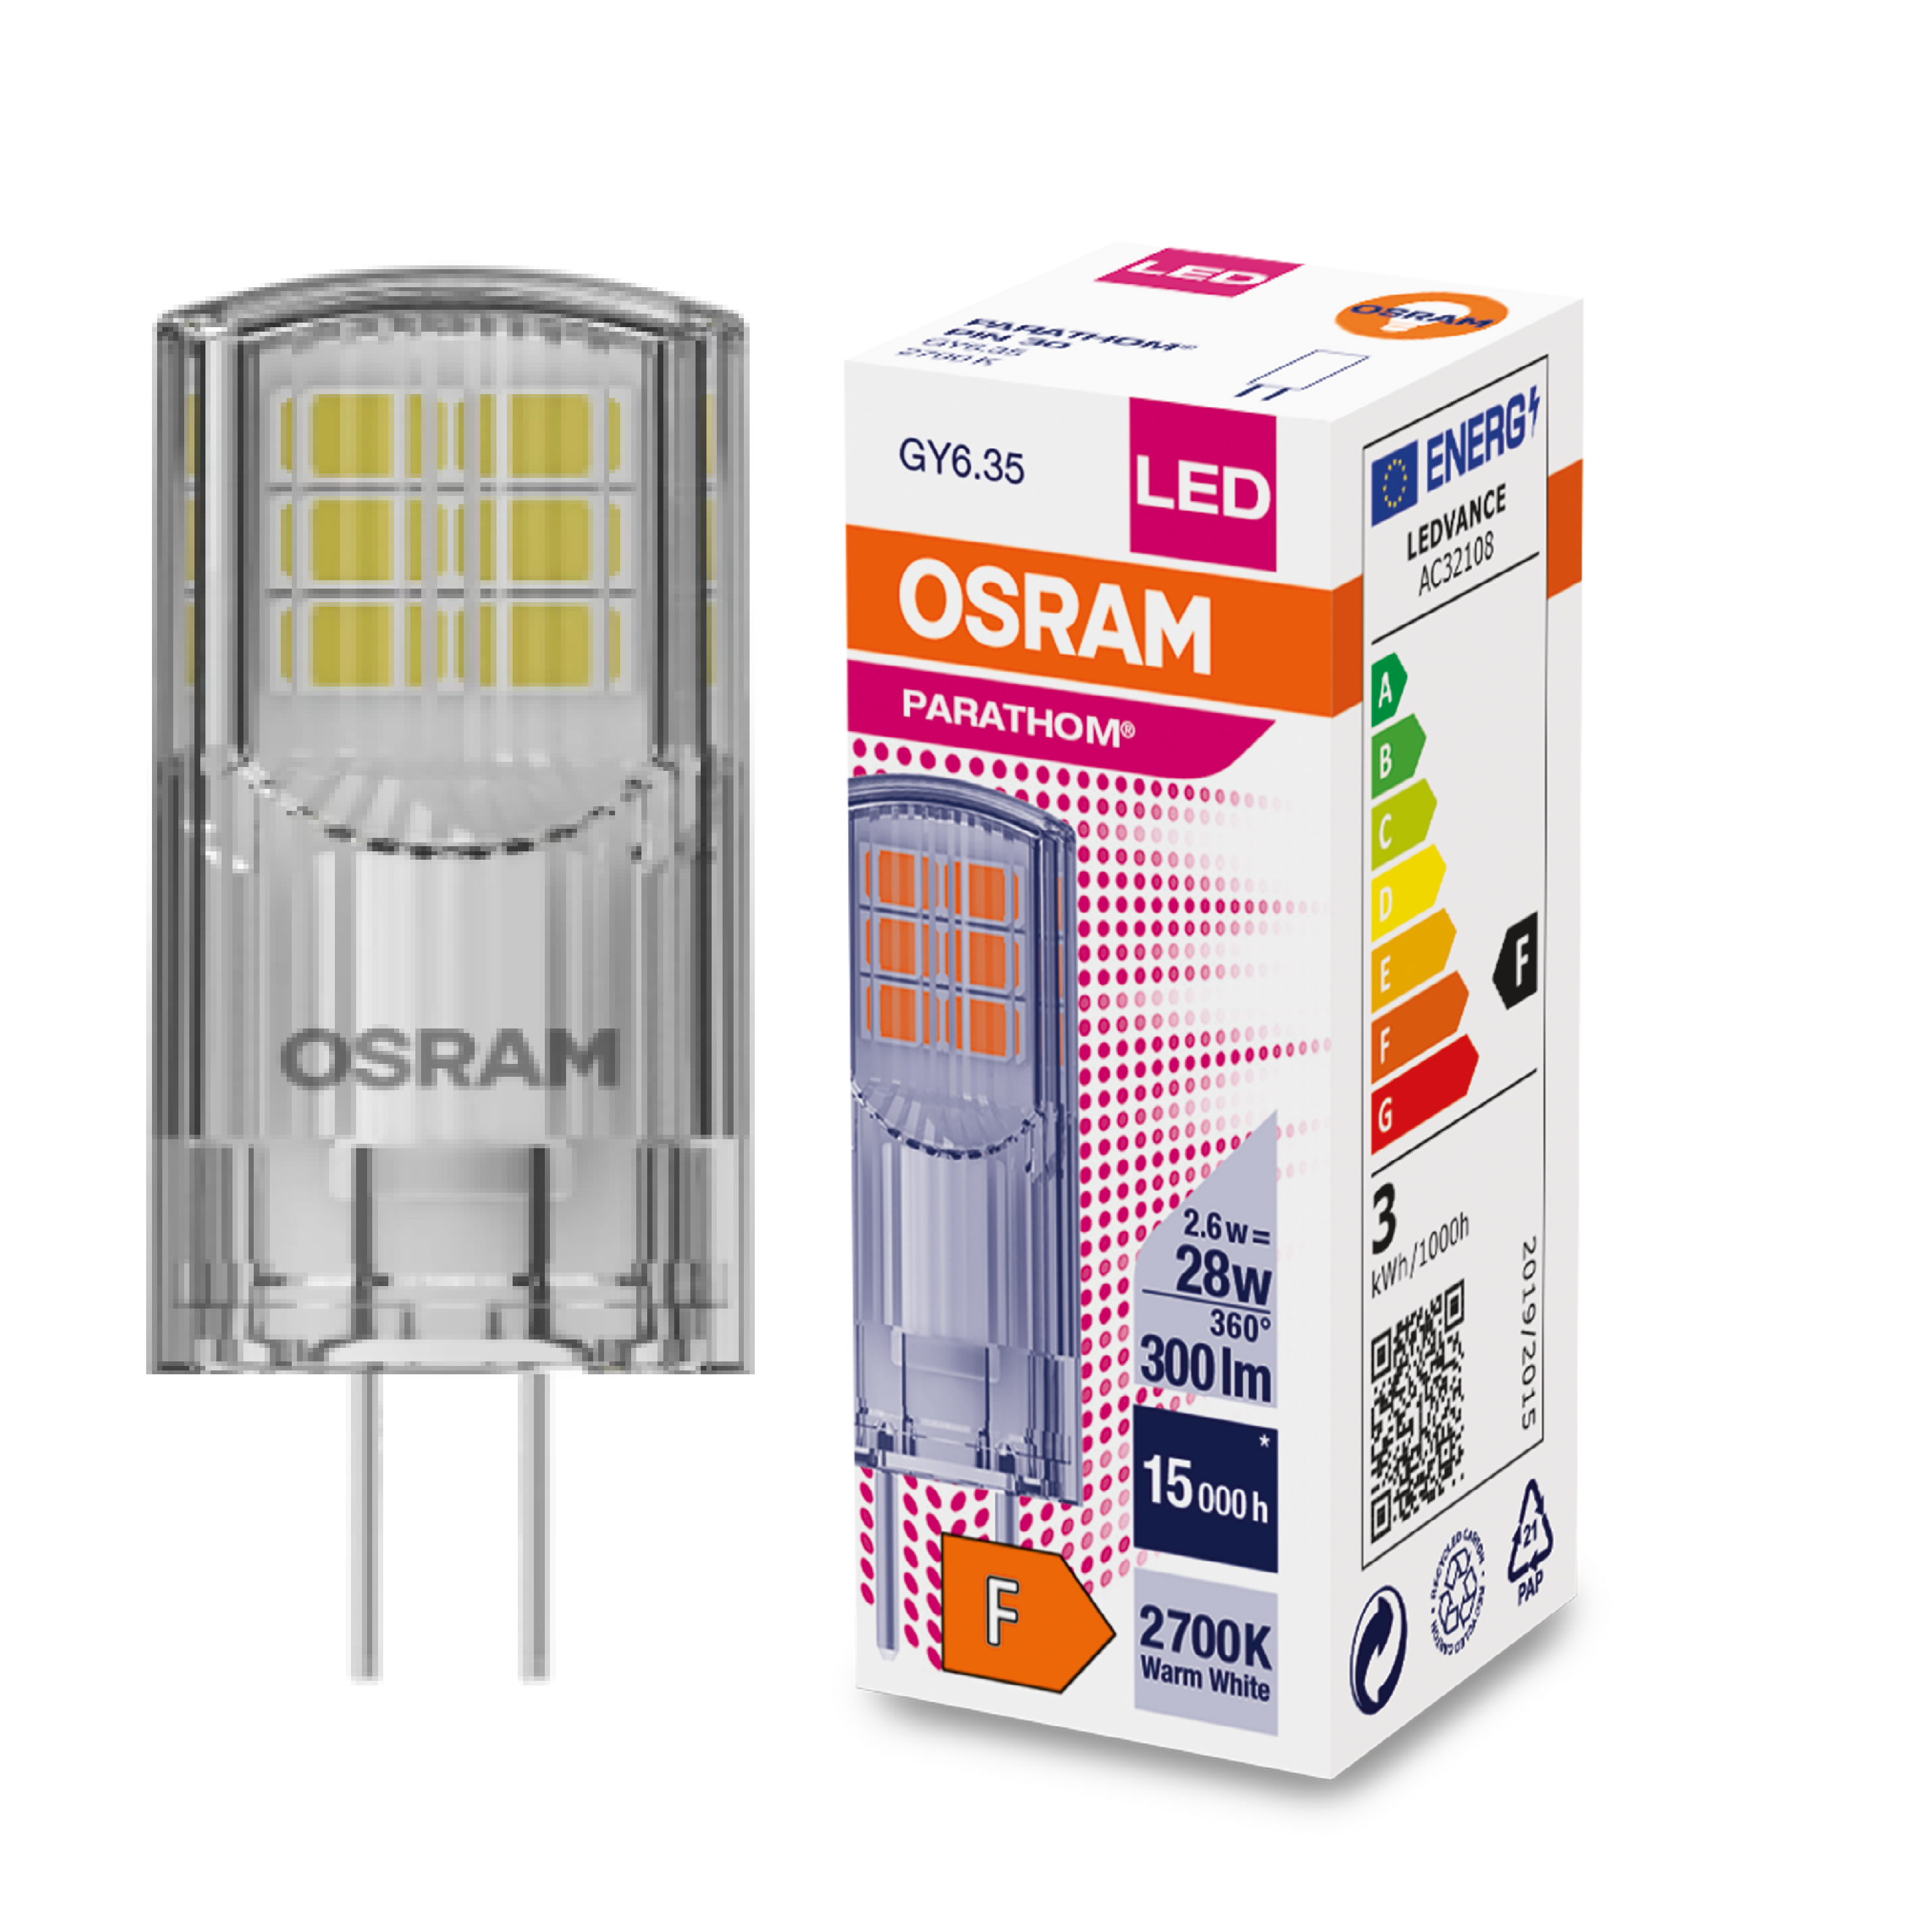 Osram Parathom LED PIN G4 12V 2.6W 300 LUMENS 827 Warm White NON-DIMMABLE Replaces 28W